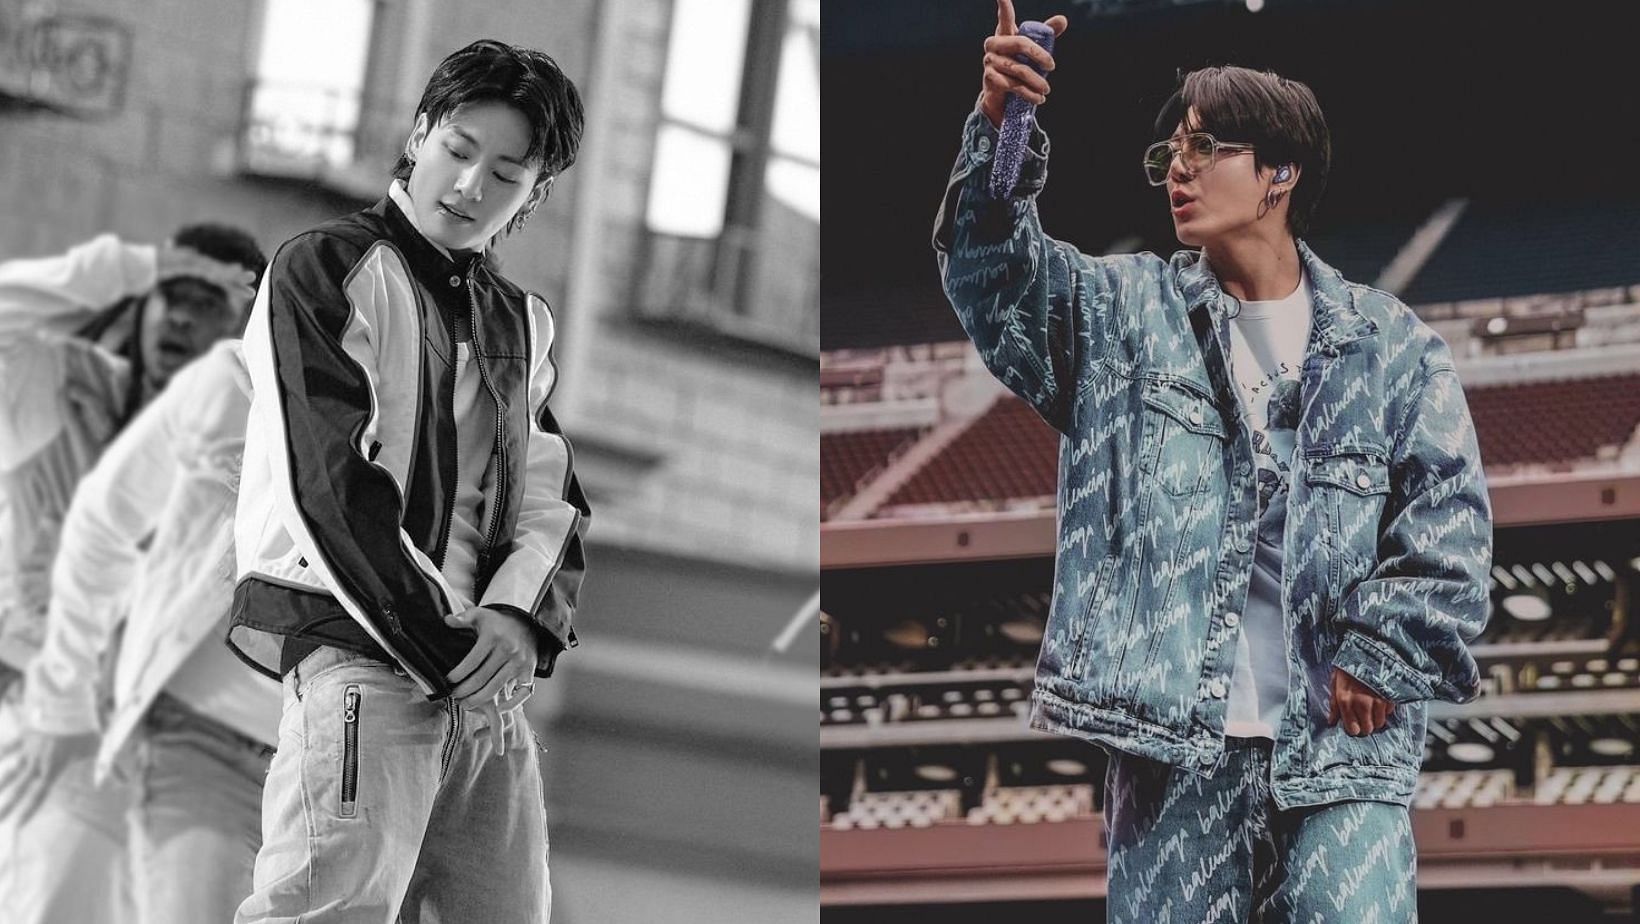 Featuring Jeon Jungkook of BTS. (Images via X/@JJK_Times &amp; @SICKTEAR7)